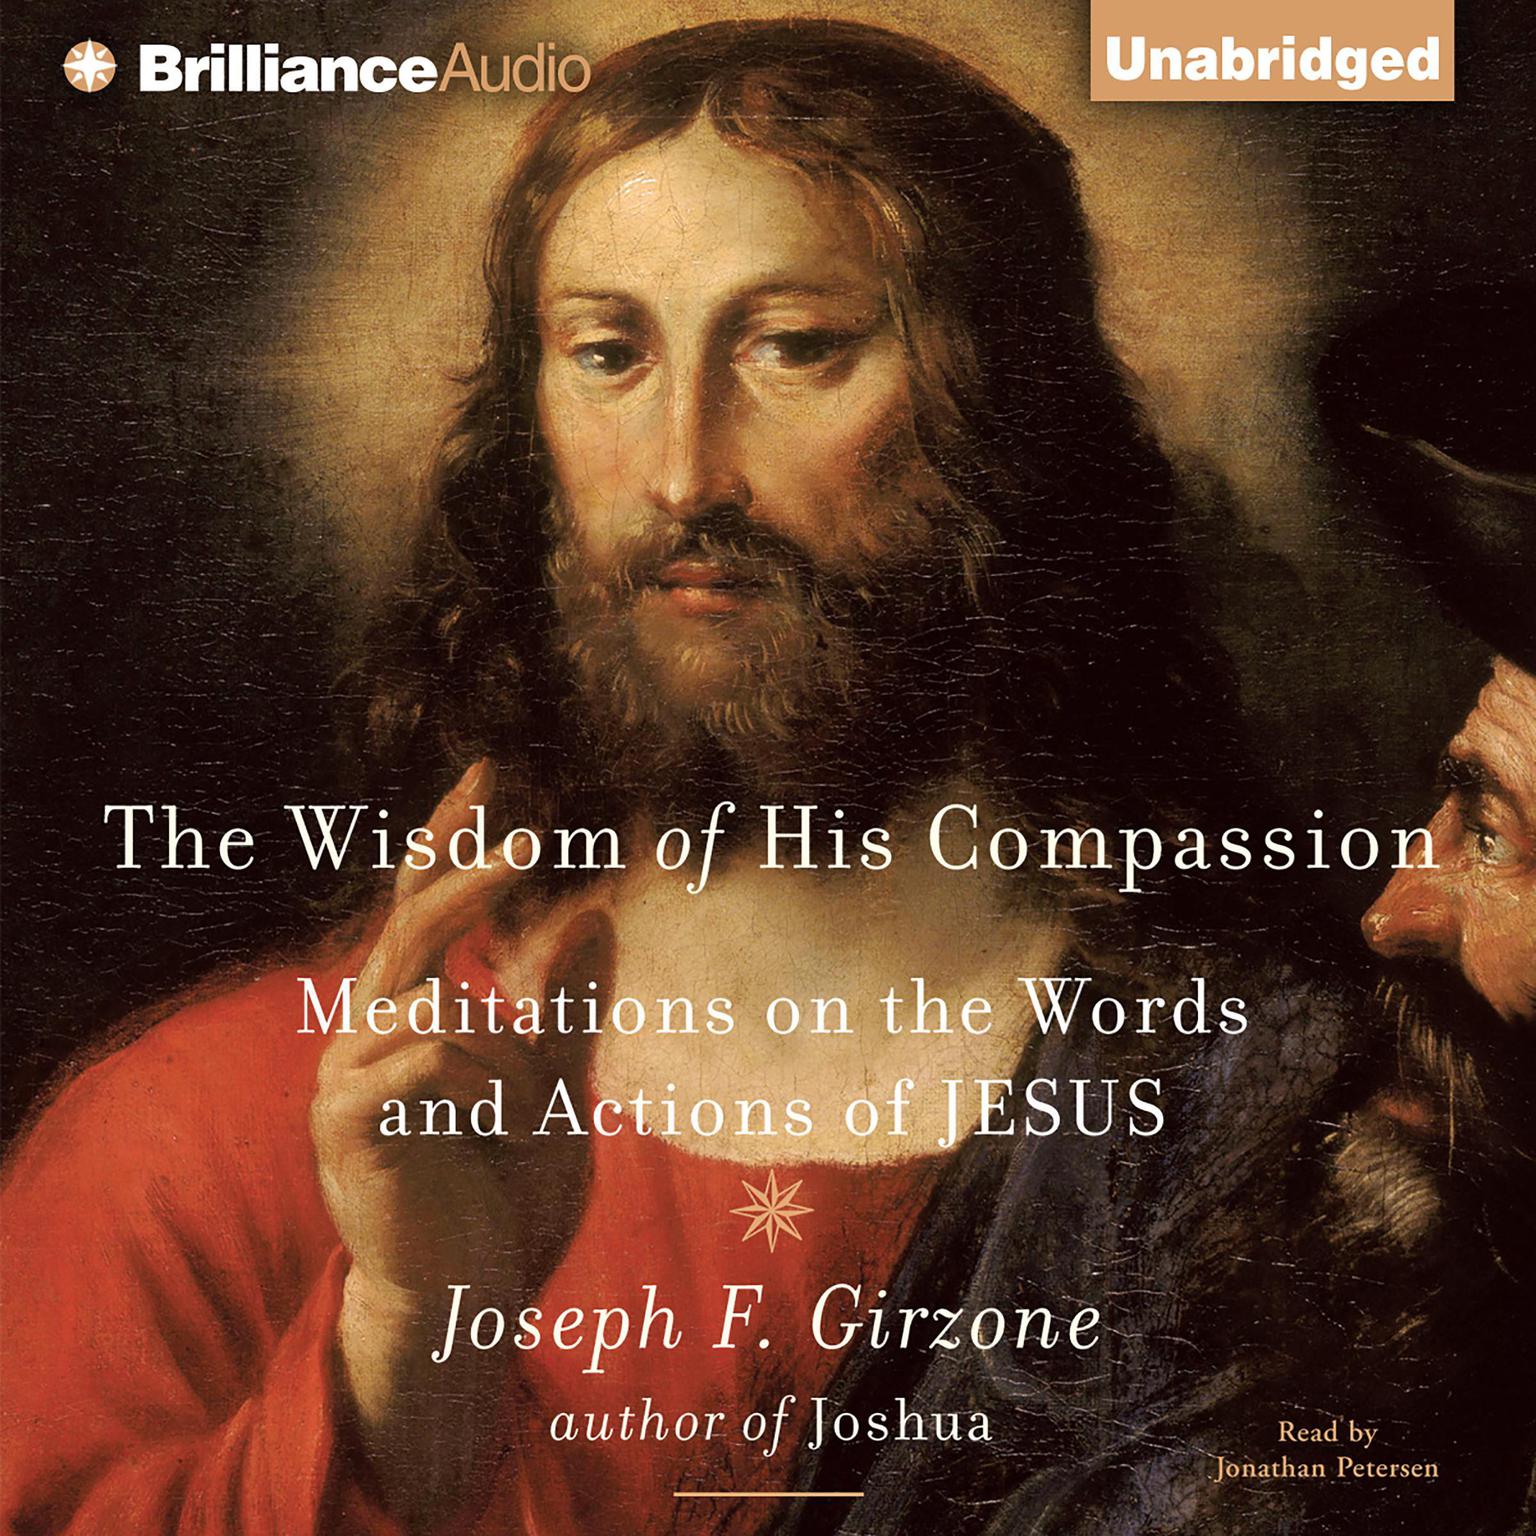 The Wisdom of His Compassion: Meditations on the Words and Actions of Jesus Audiobook, by Joseph F. Girzone